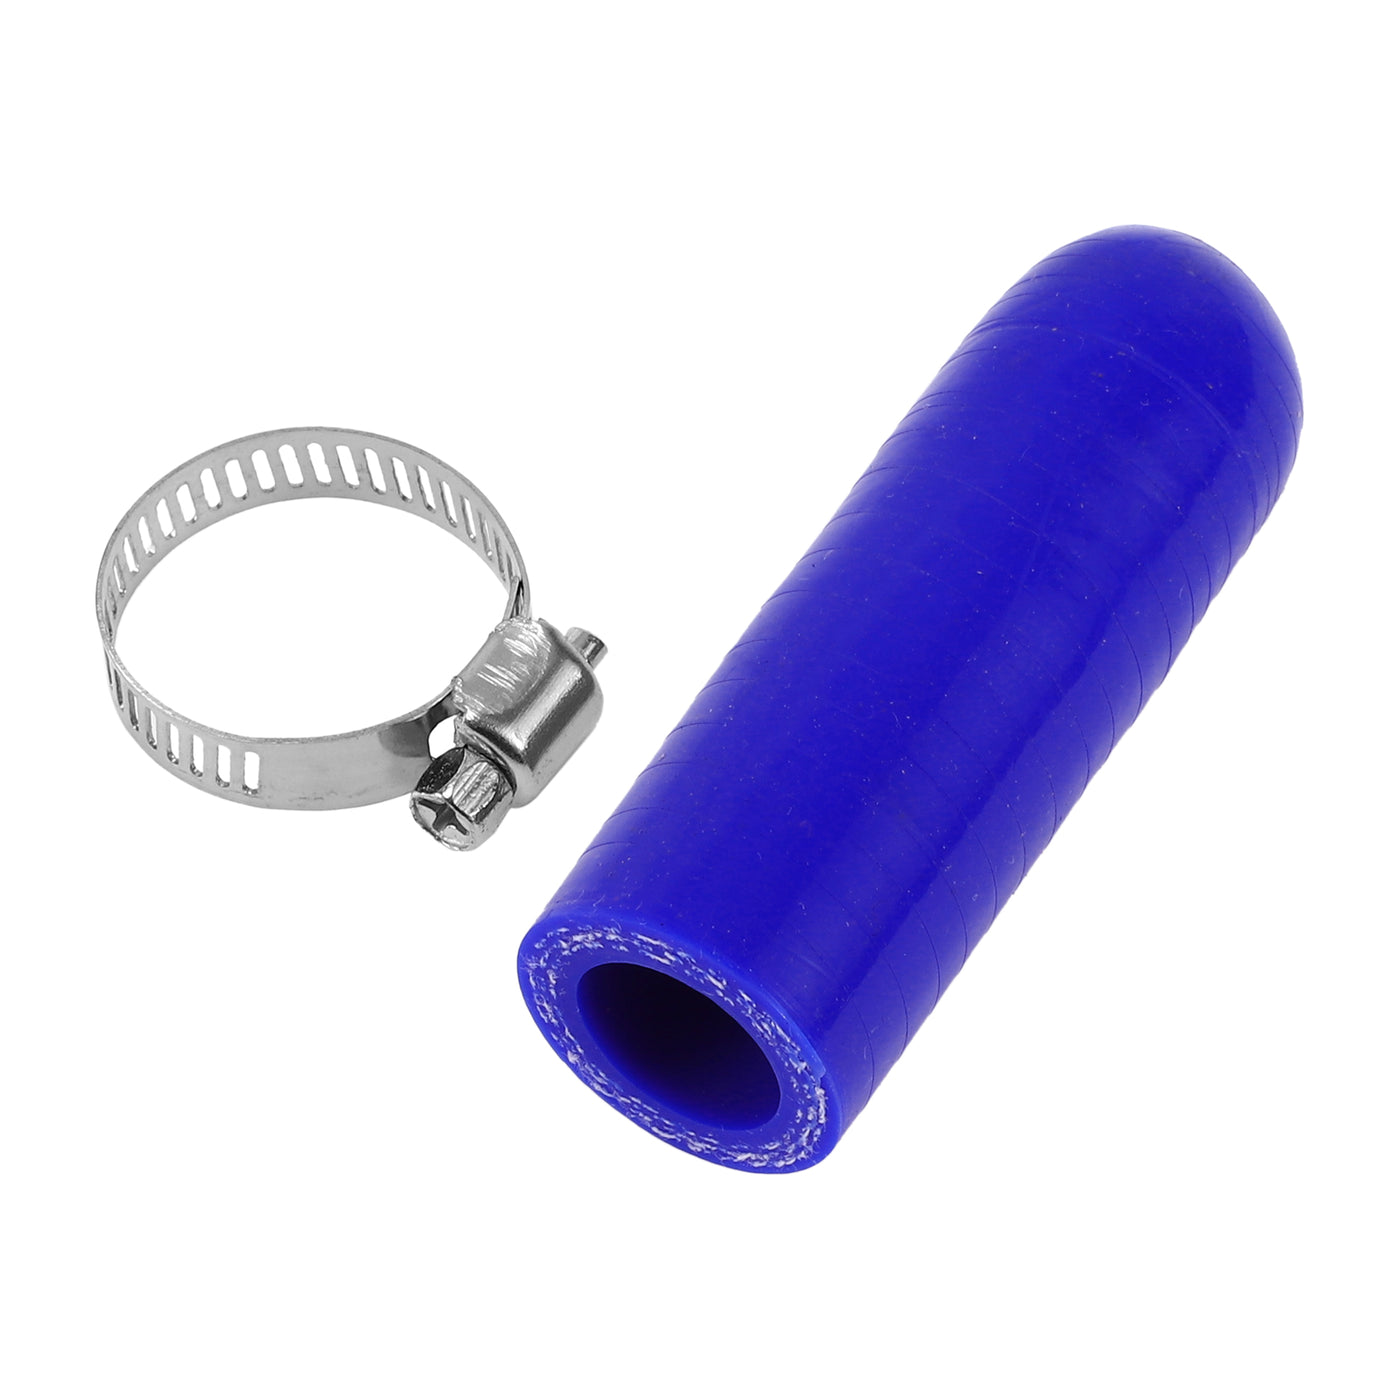 X AUTOHAUX 1 Pcs 60mm Length 16mm/0.63" ID Blue Car Silicone Rubber Hose End Cap with Clamp Silicone Reinforced Blanking Cap for Bypass Tube Universal